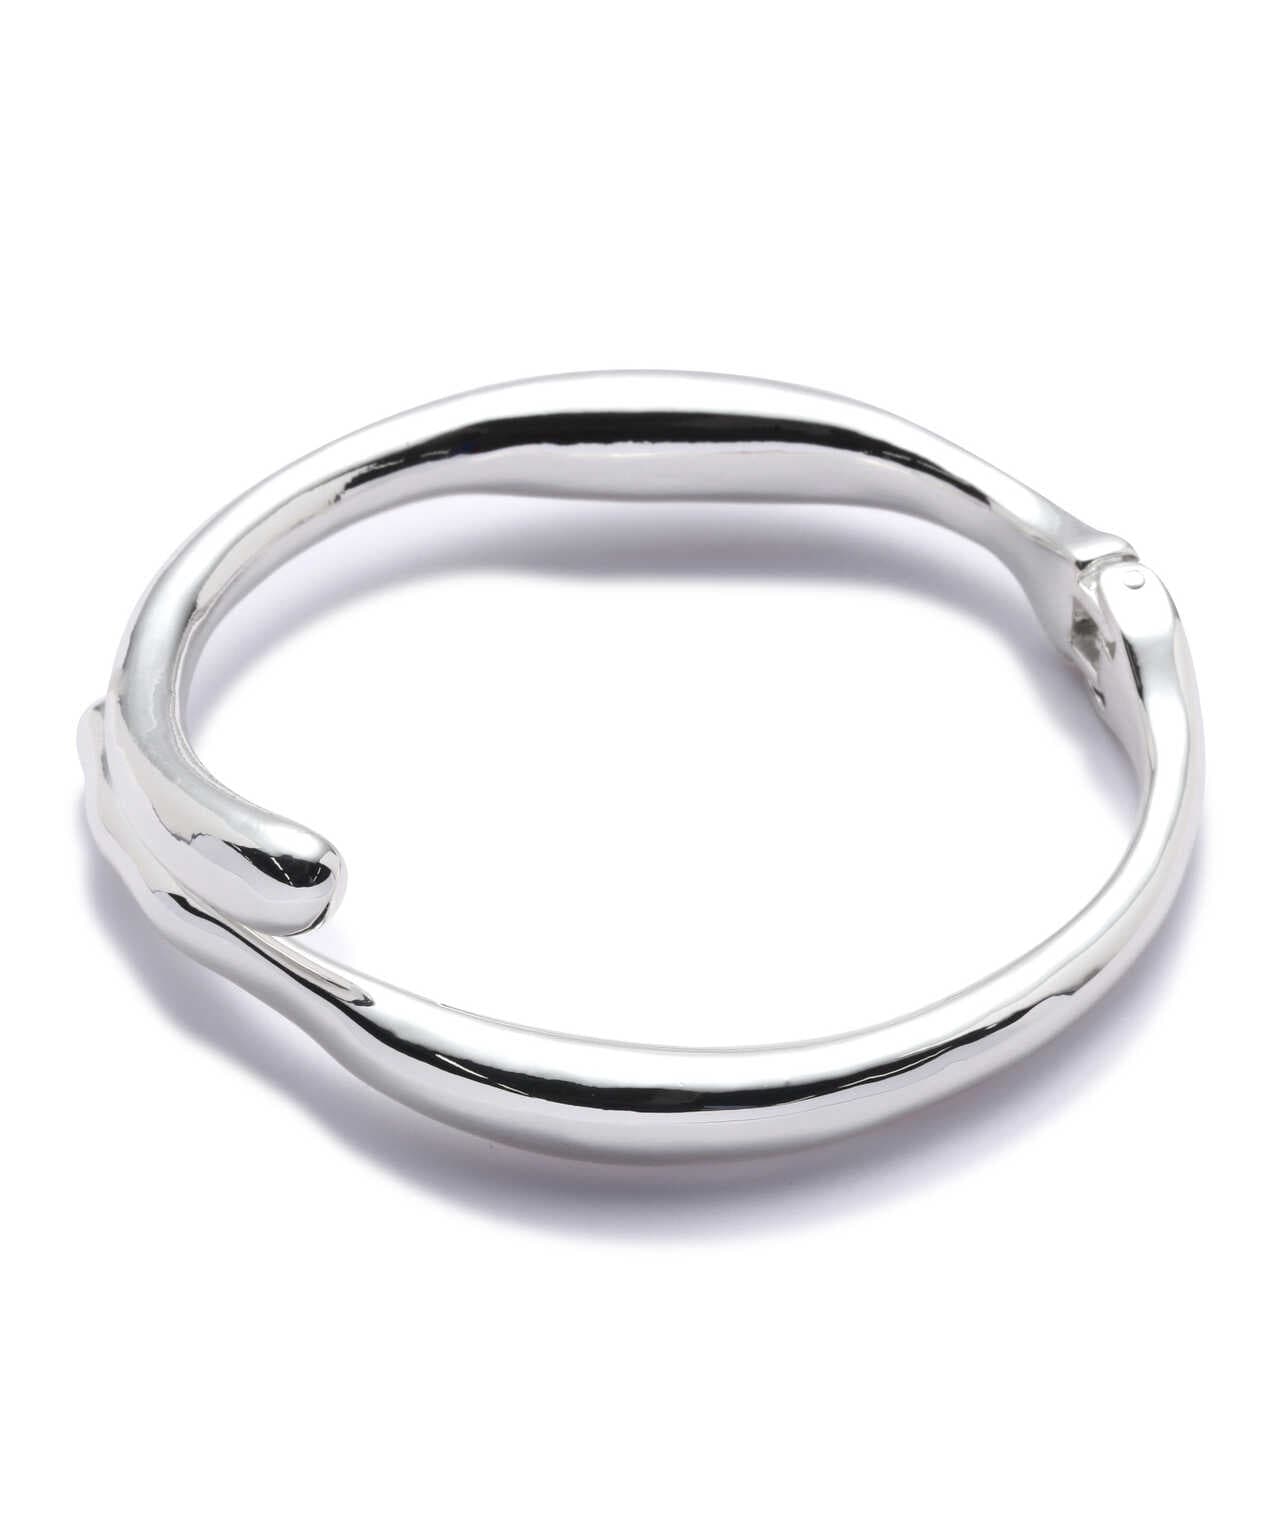 Nothing And Others/ナッシングアンドアザーズ/NuanceLine Arm Bangle